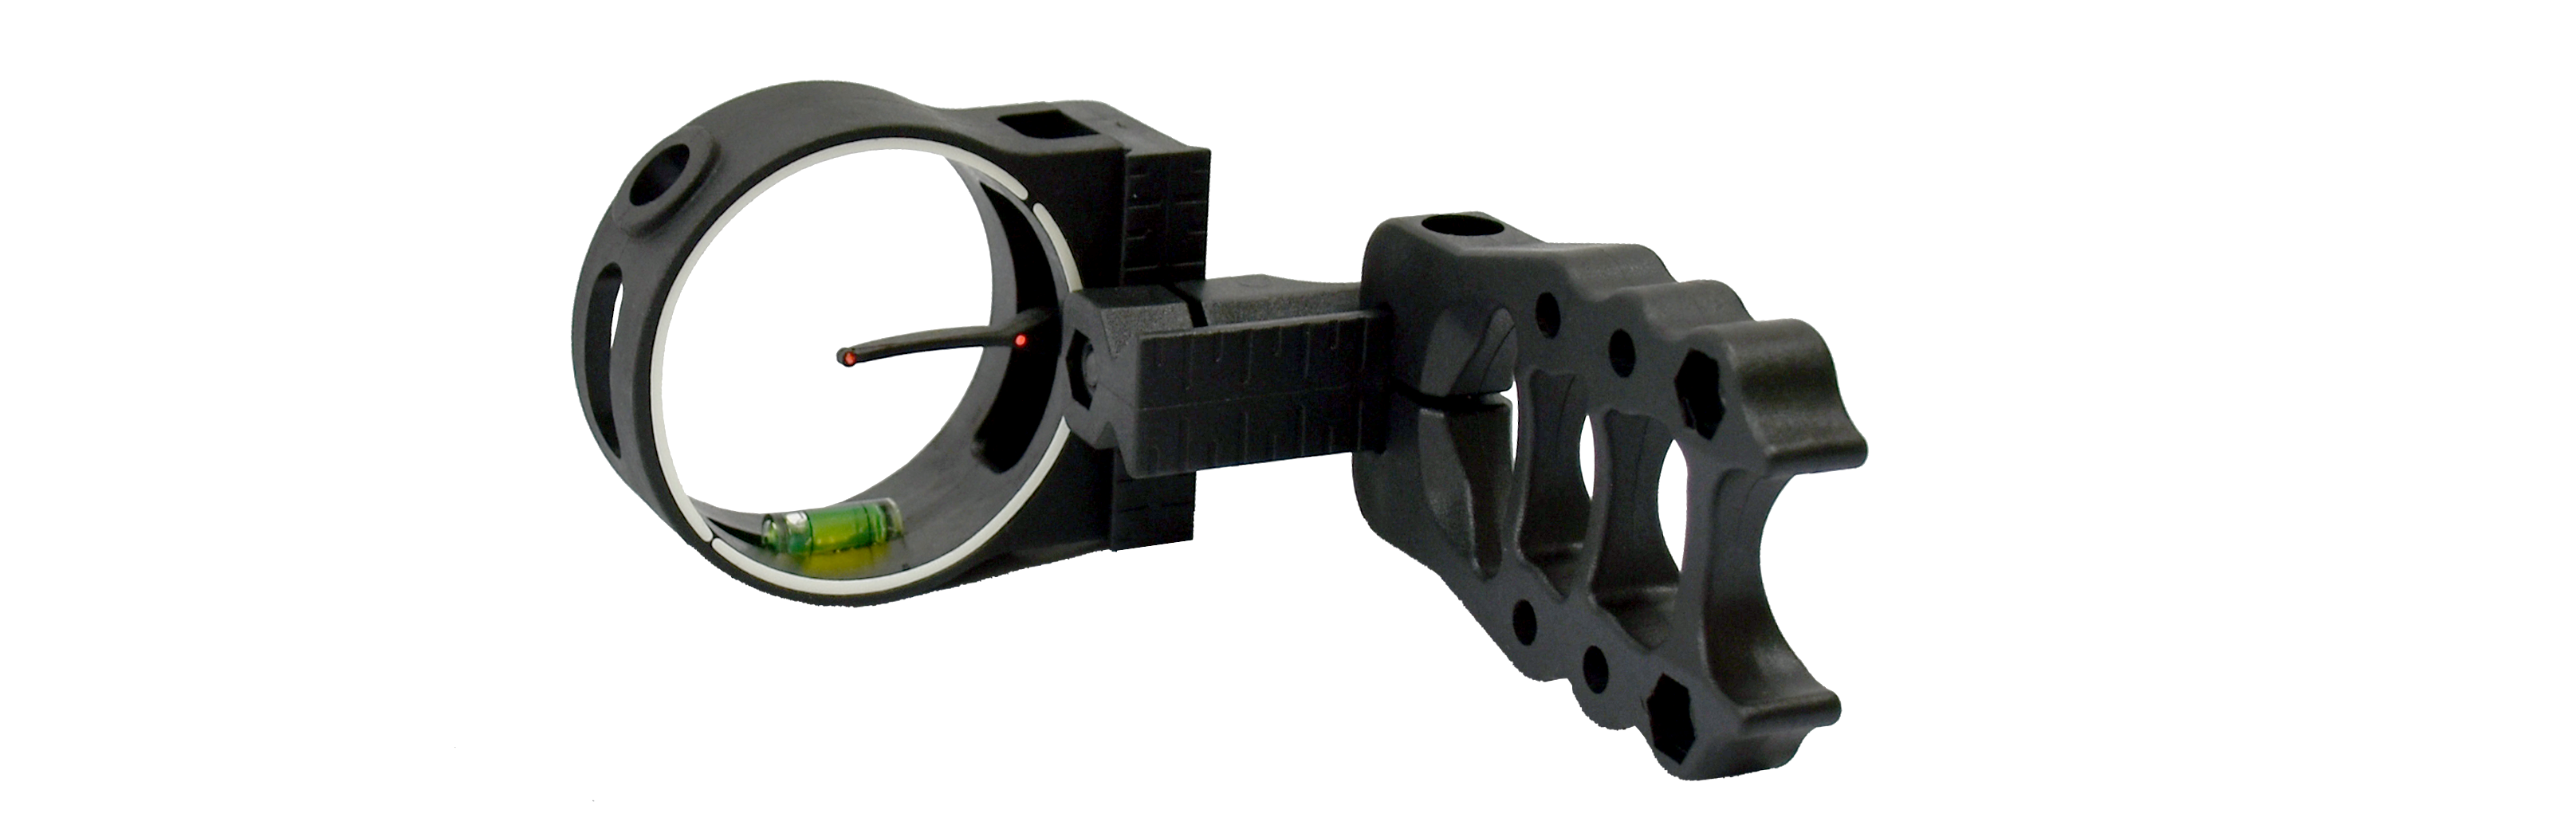 /archive/product/item/images/CompoundBowSight/Compound-Bow-Sight-1.png